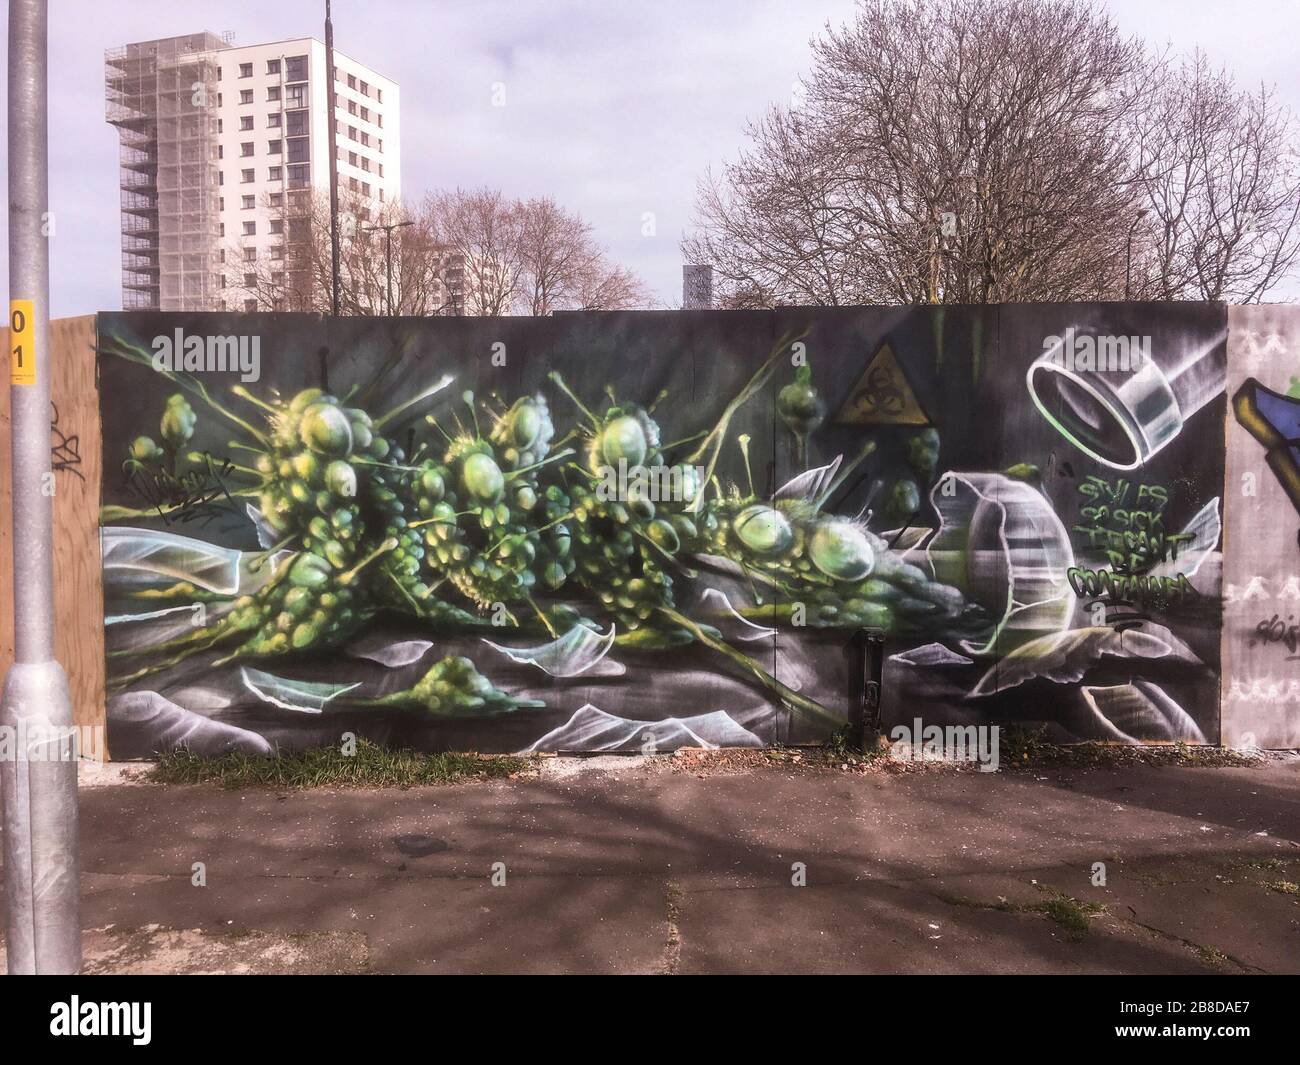 Trafford, Manchester, UK. 21st March 2020. 'Style's so sick it can’t be contained' defiant Coronavirus art after partial UK lock down. Graffiti artist in Trafford Greater Manchester ignores PM's 'urges' to avoid non essential travel and contact today Credit: Gary Roberts/Alamy Live News Stock Photo